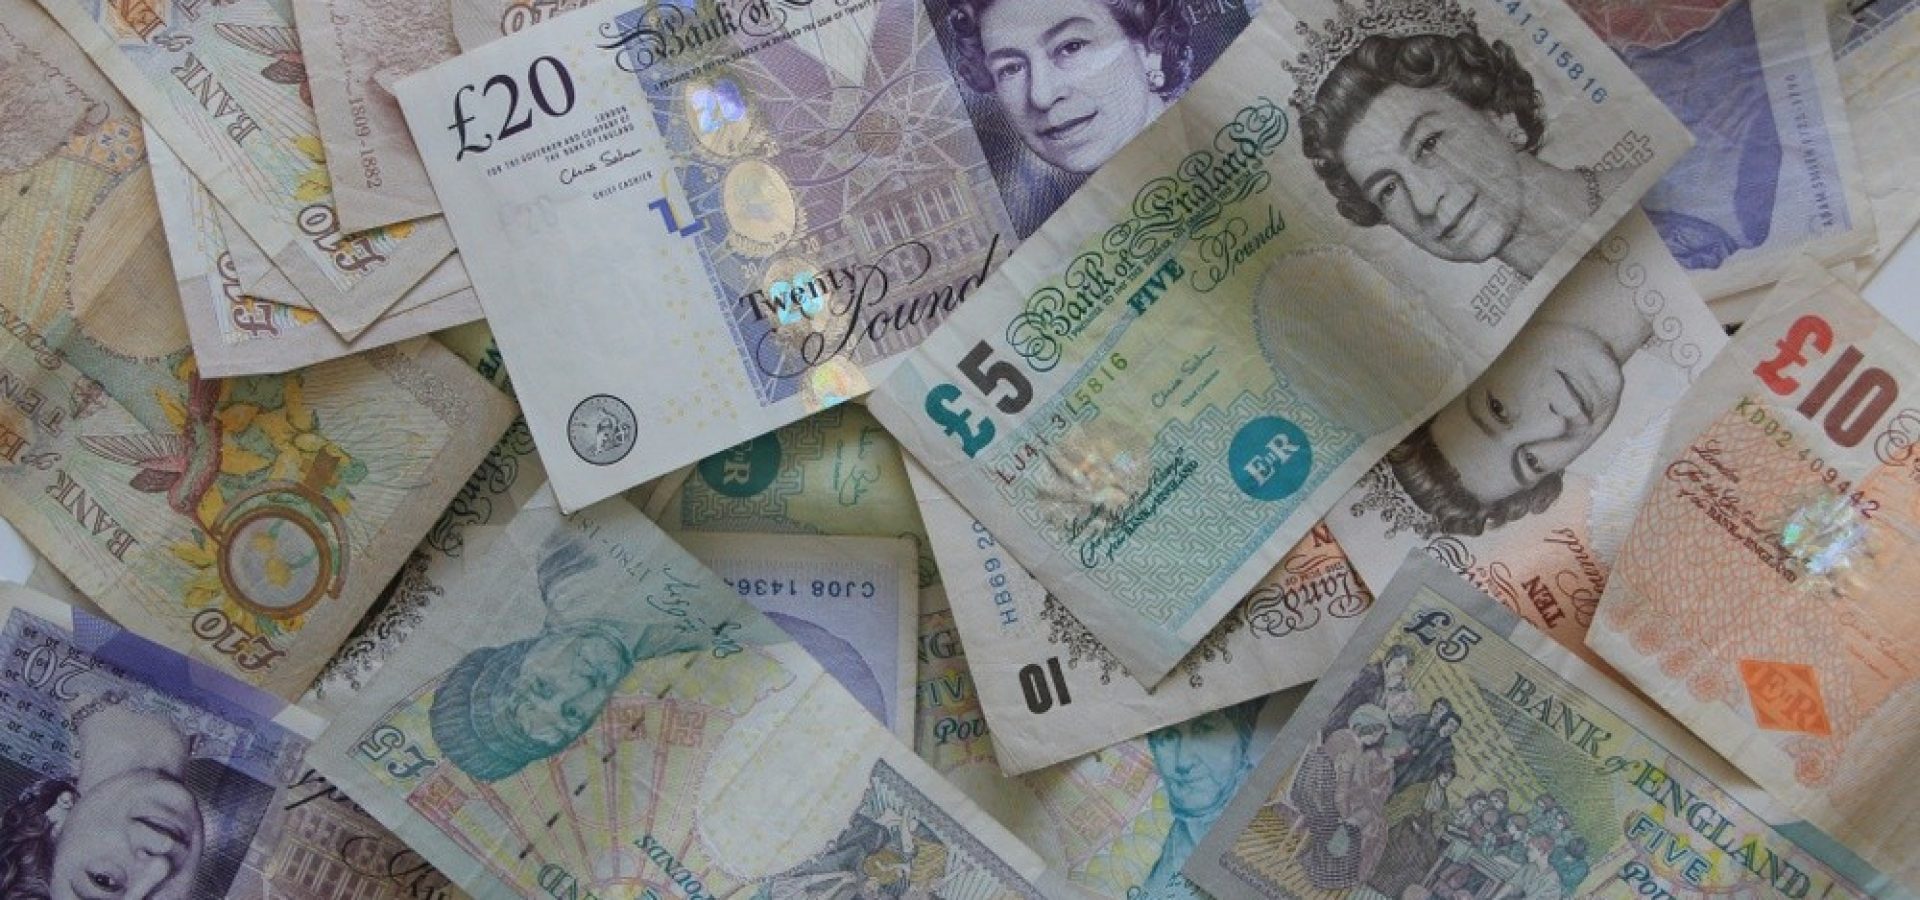 Pound and other currencies